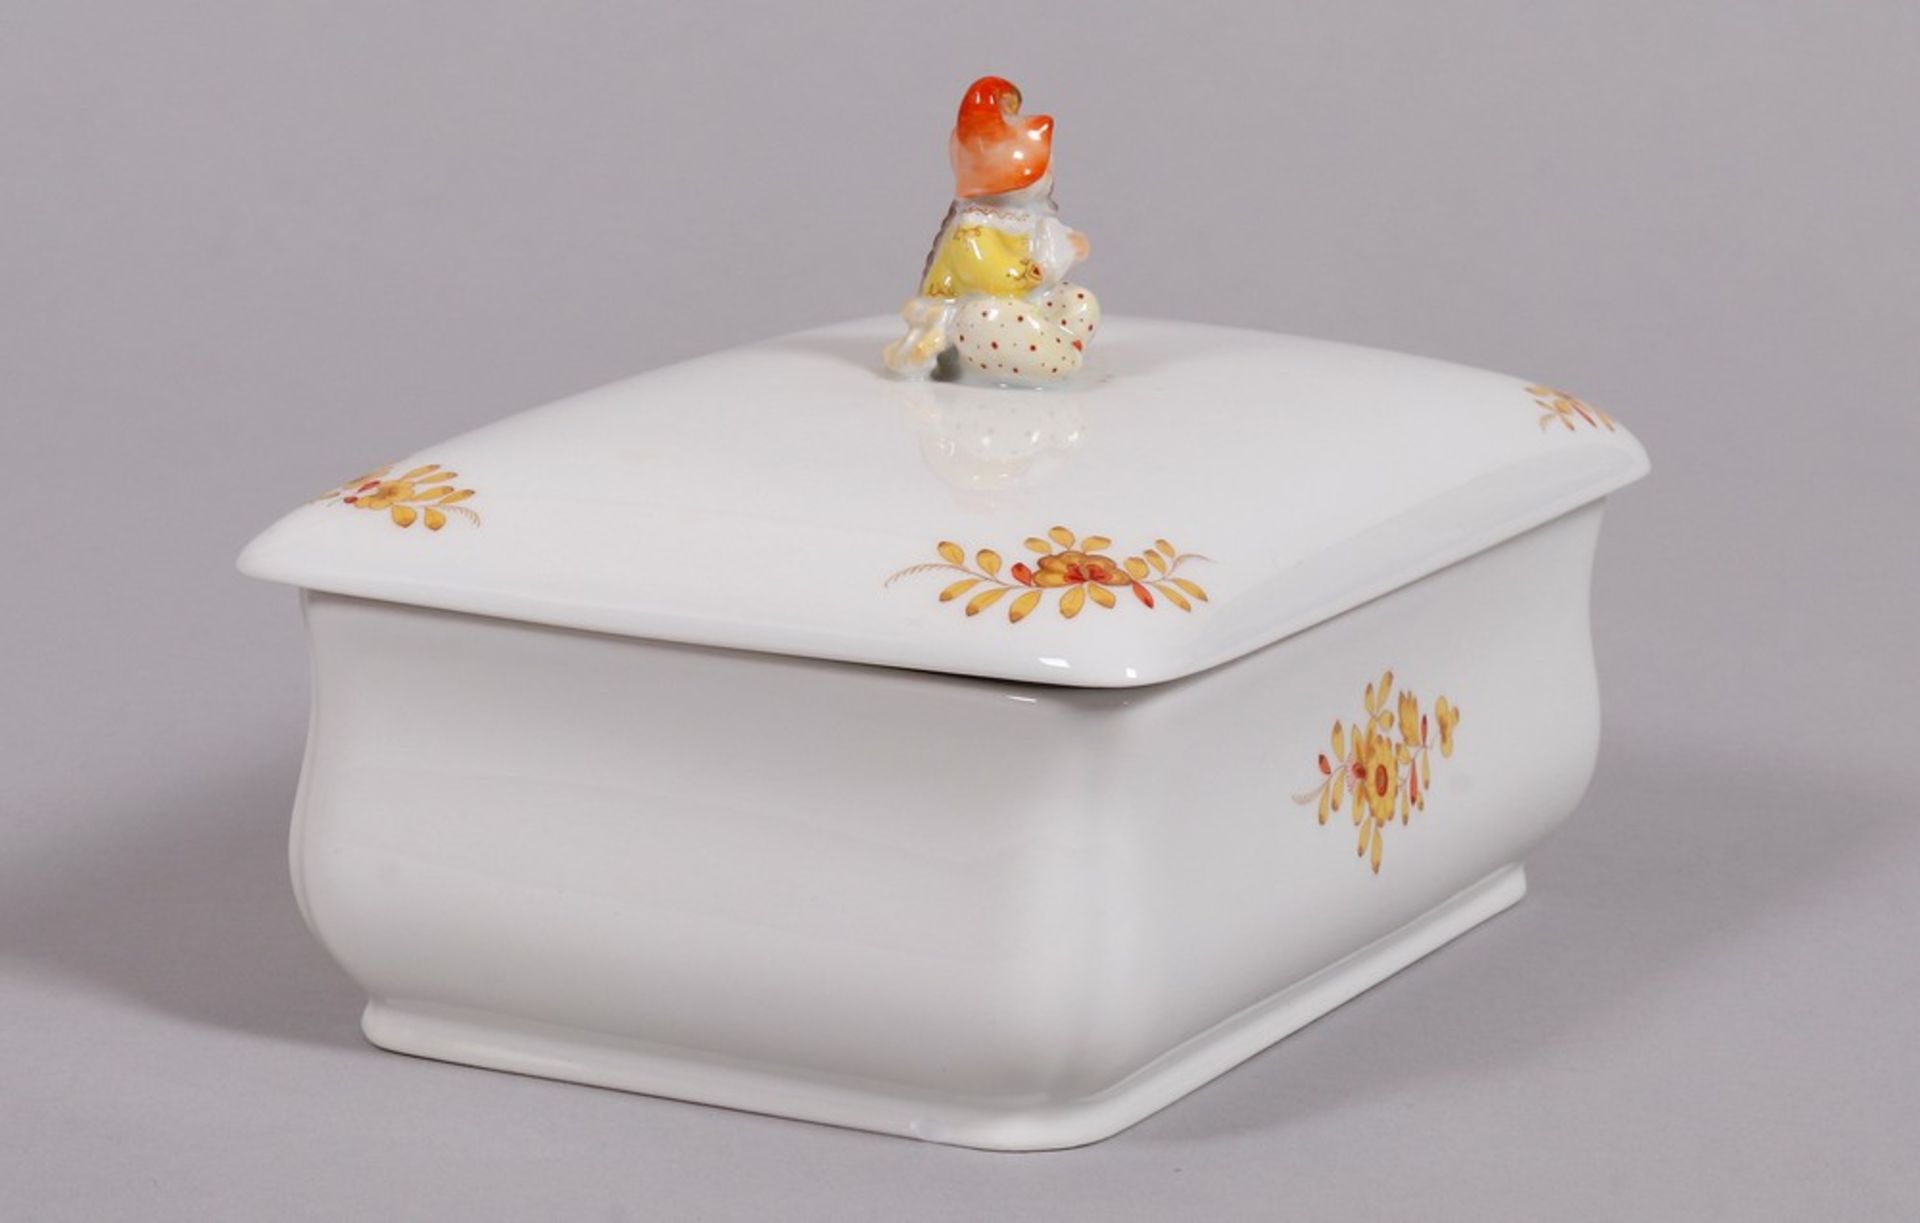 "Dose mit Chinesen" (lidded box with chinese figure), design 1929 by Paul Scheurich for Meissen, ma - Image 5 of 8